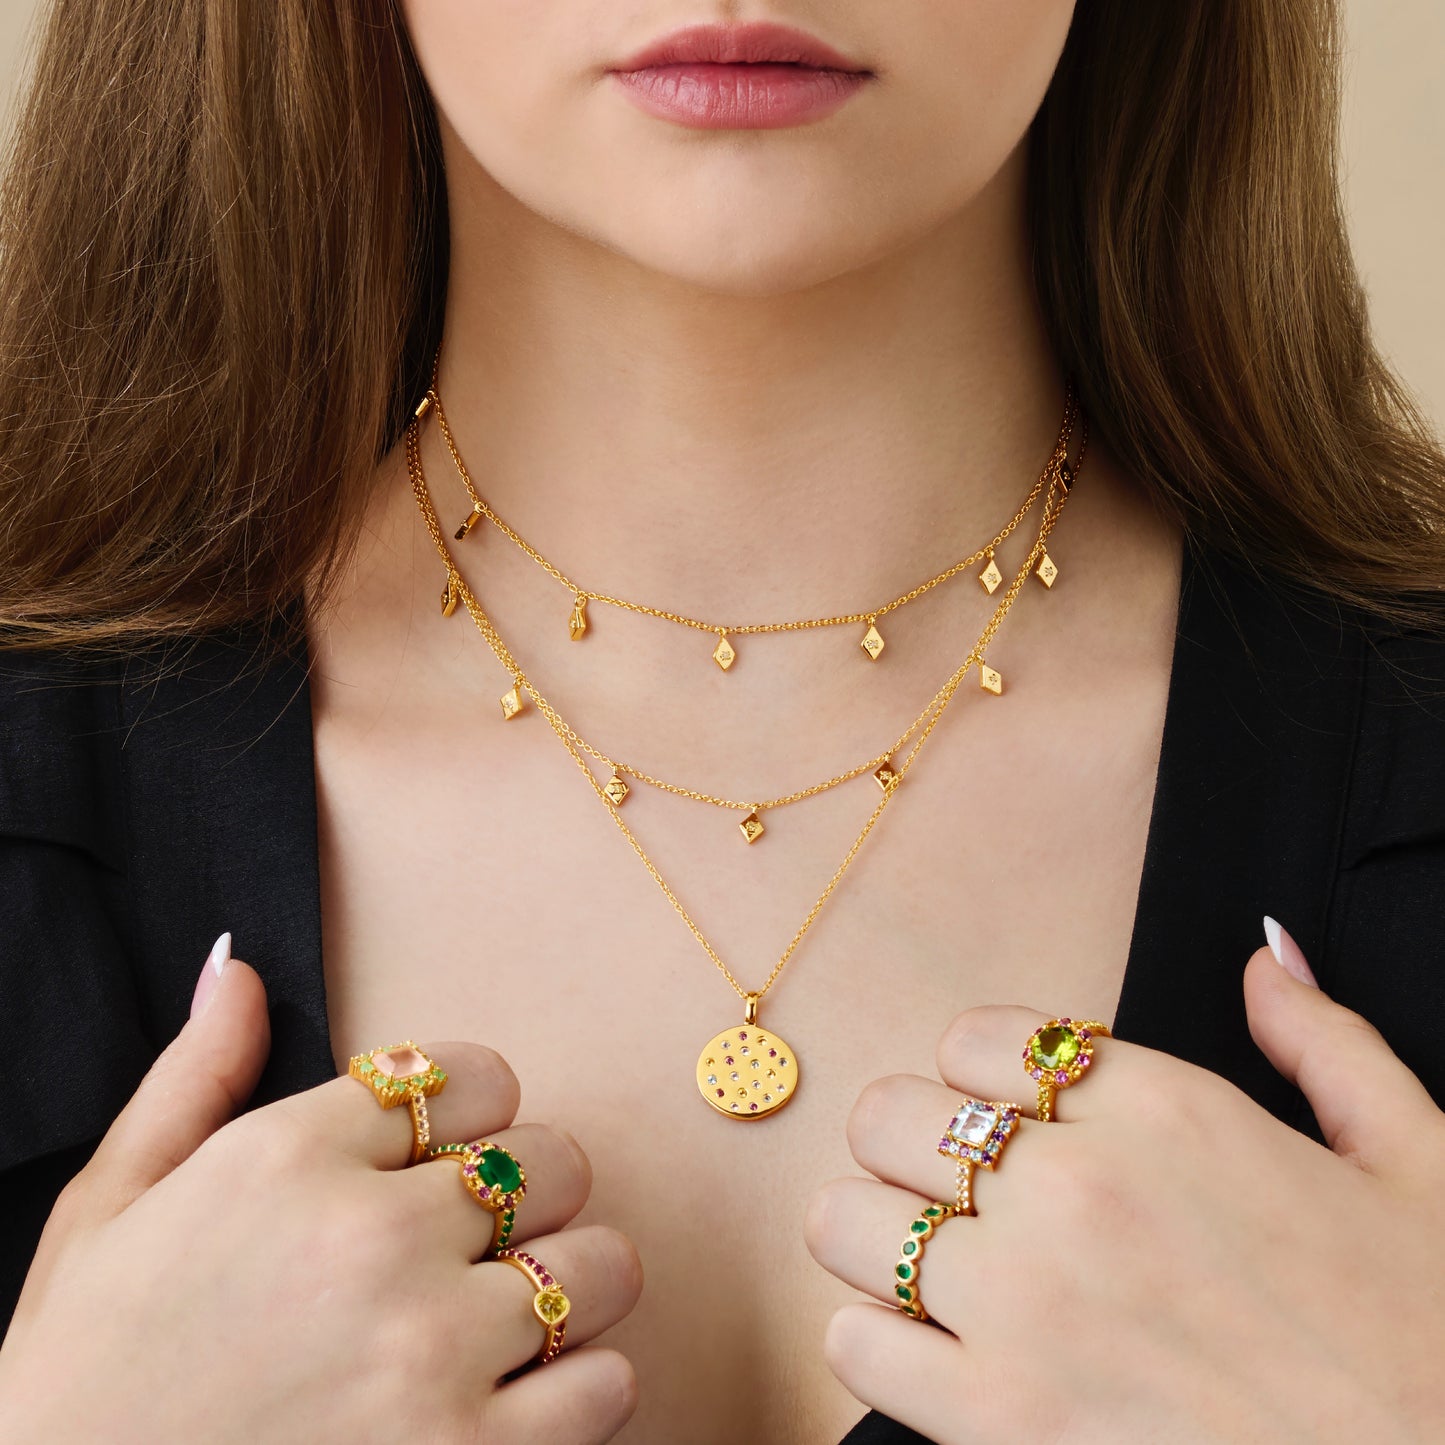 Fool's gold gemstone jewellery collection on model